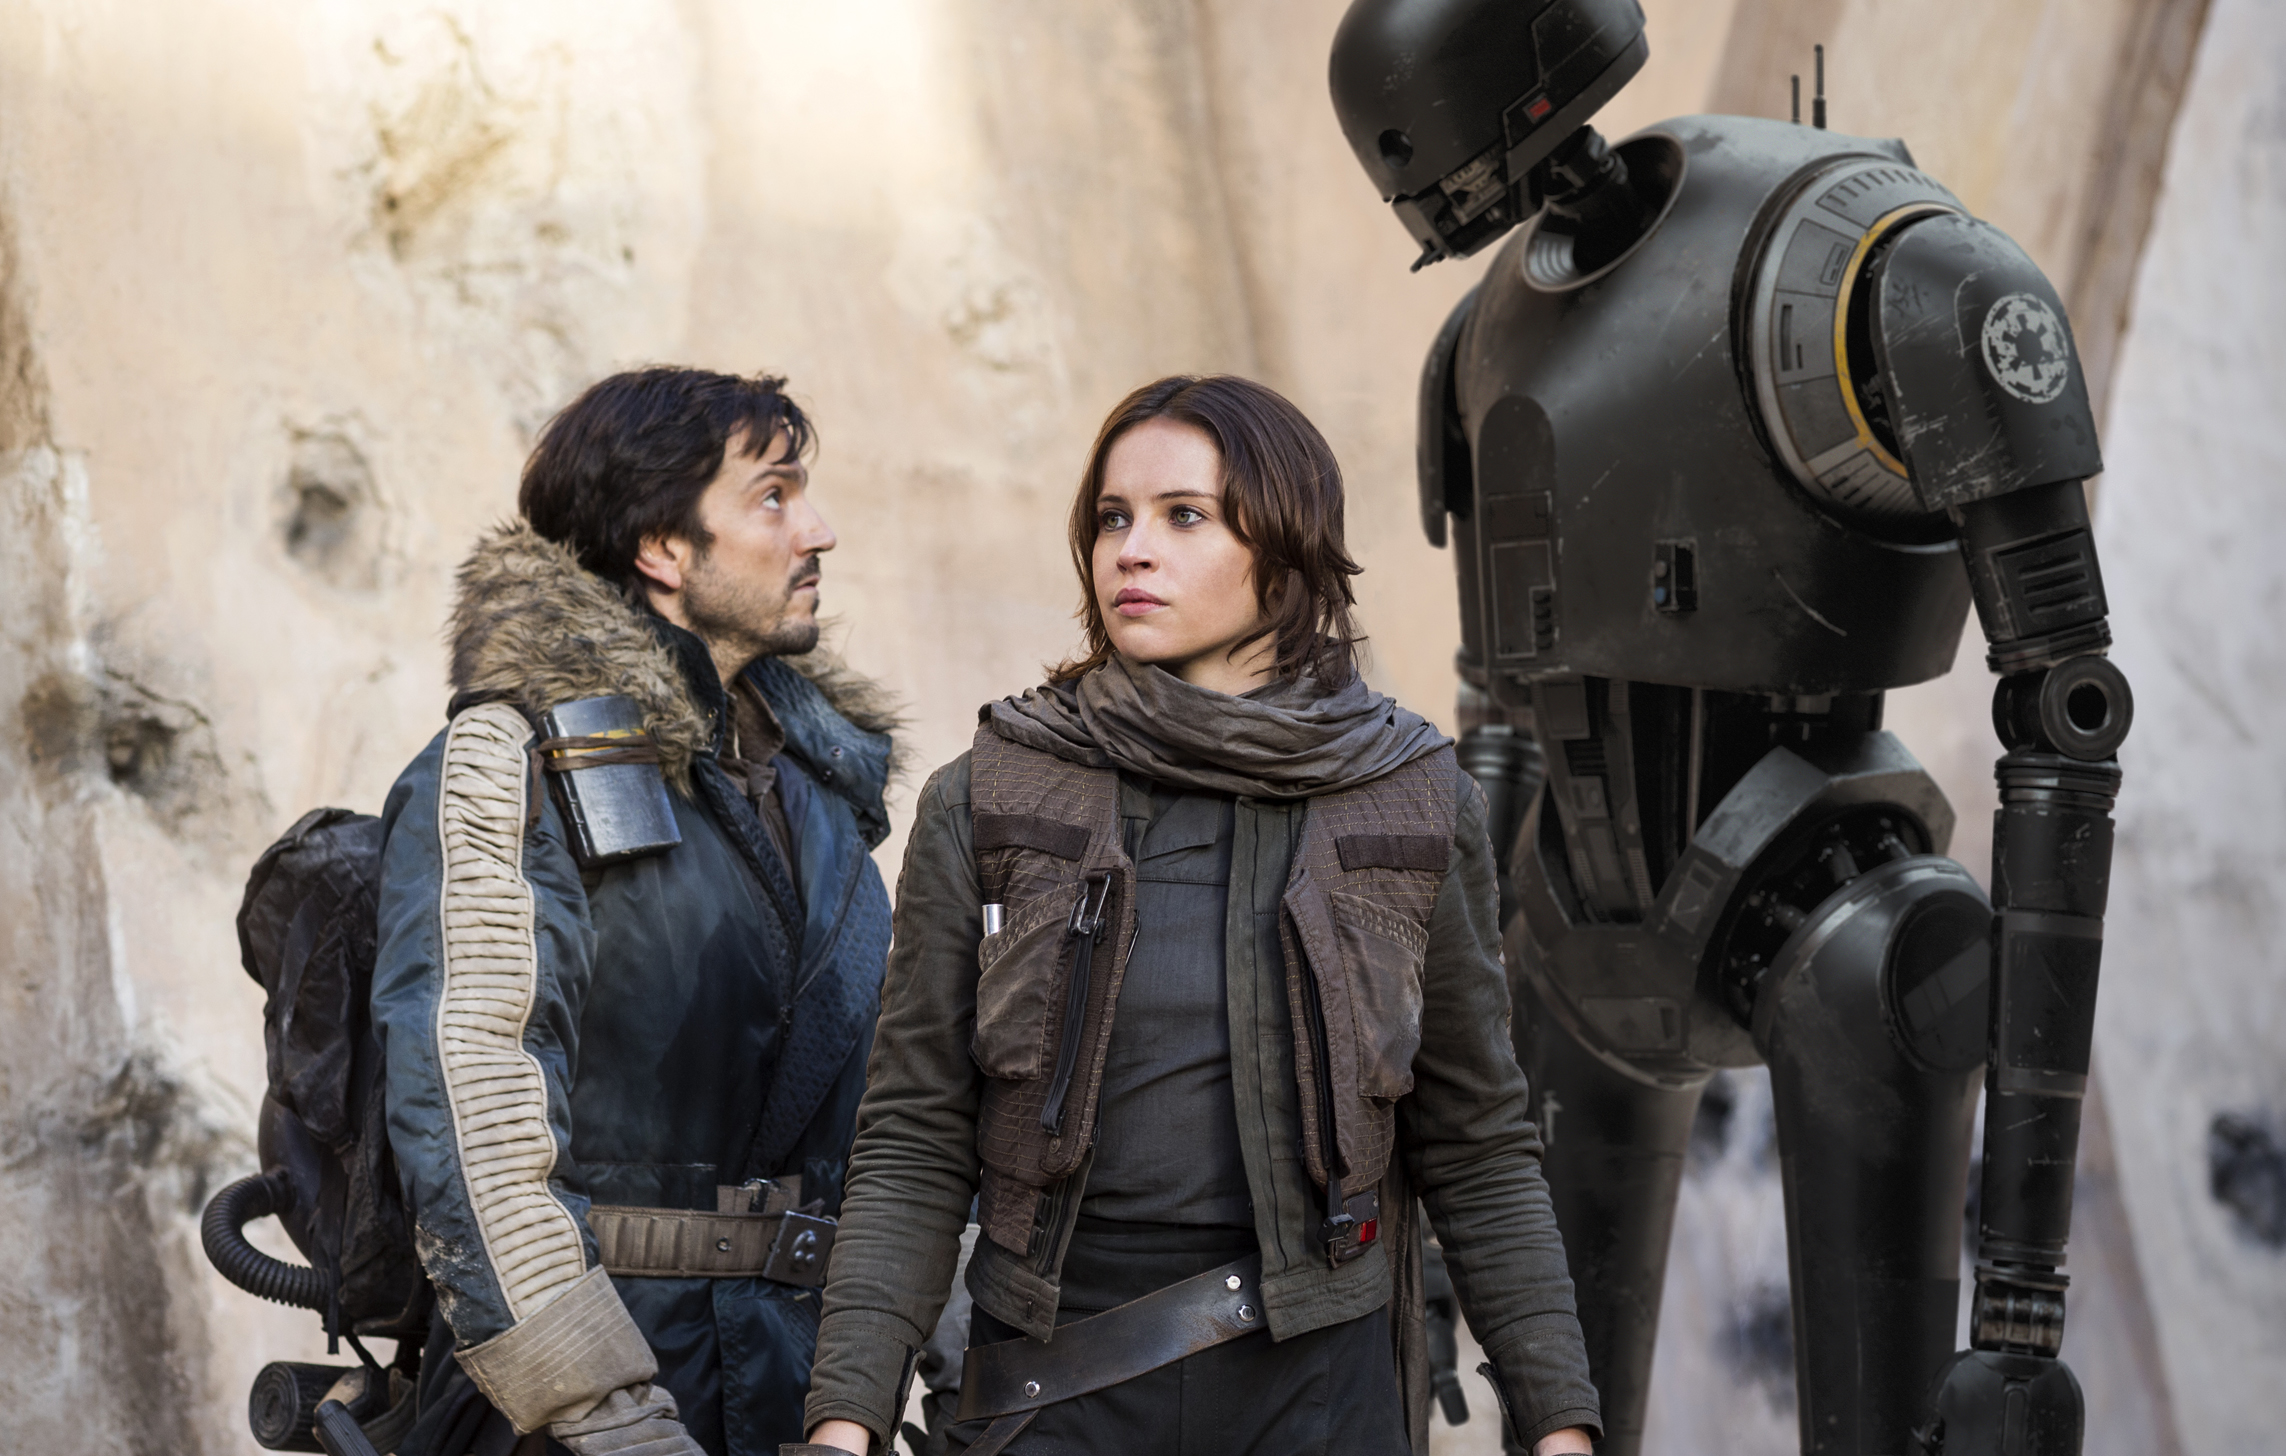 'Rogue One' Cast and Director: The Force is With Them - Front Row Features